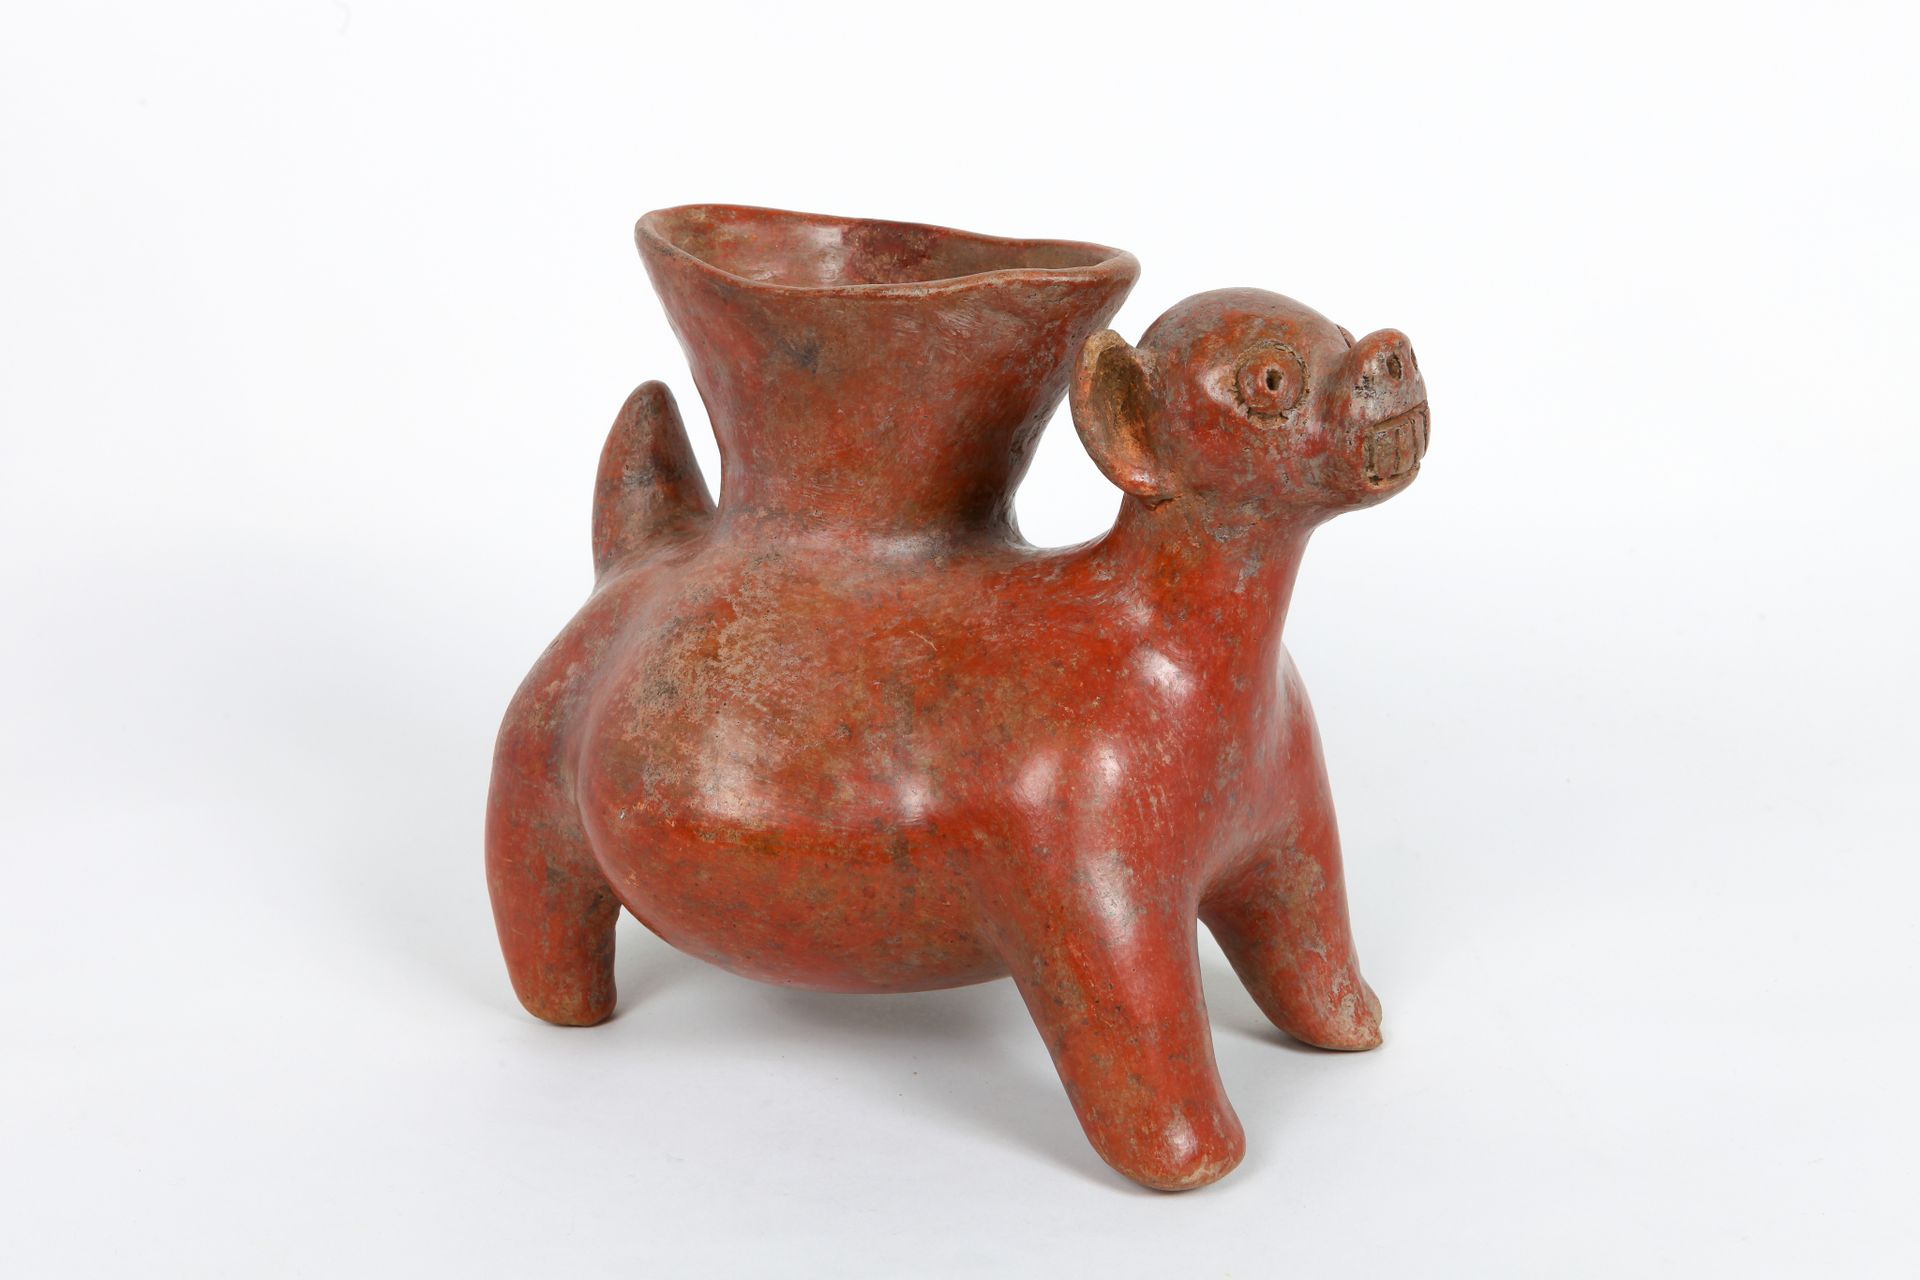 Vase in the shape of a fat dog, ears erect, mouth open showing its fangs as a si&hellip;